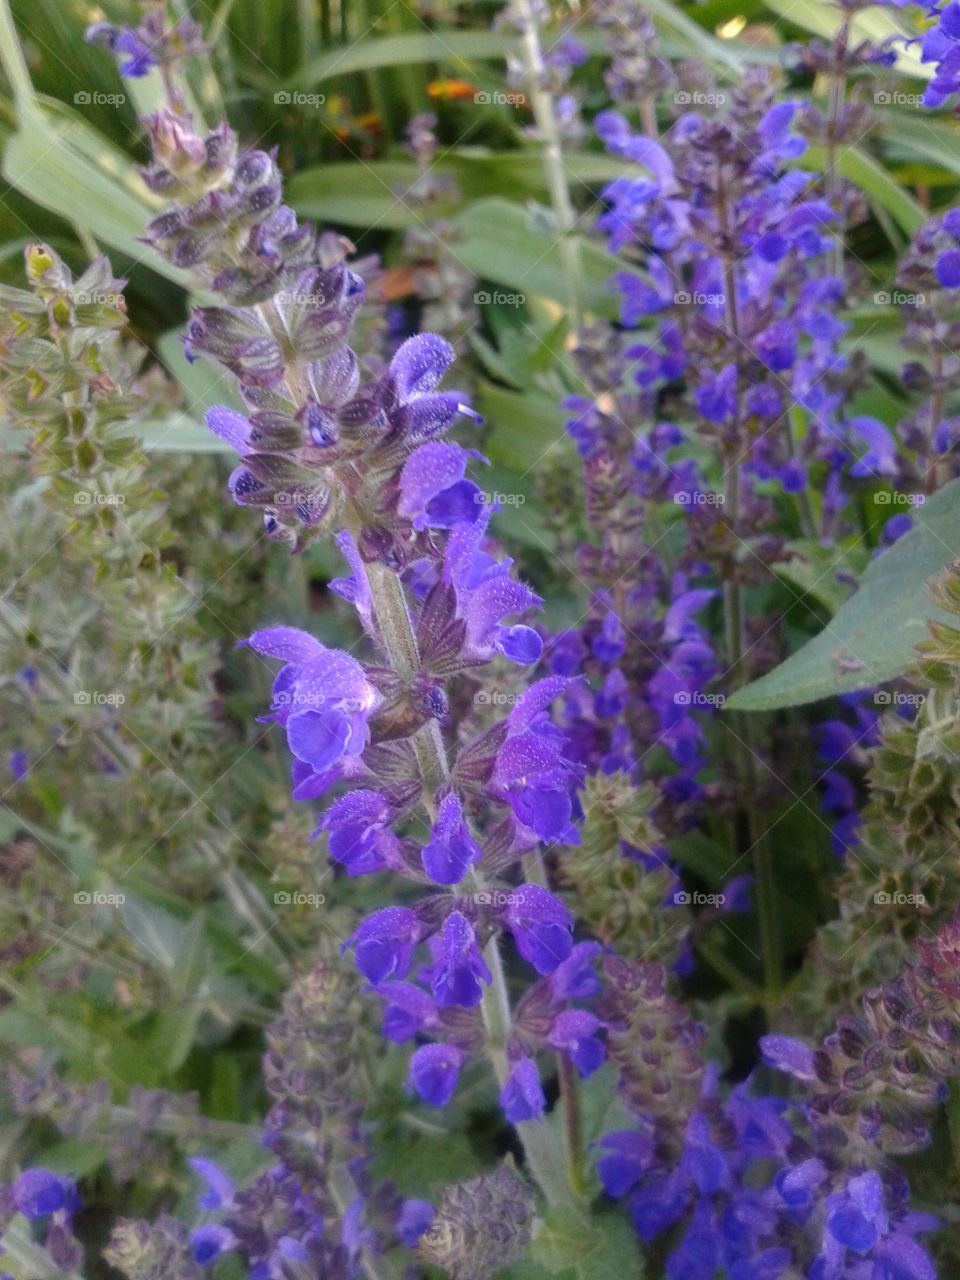 Mountain Sage. Always striking because of the color and fragrance.